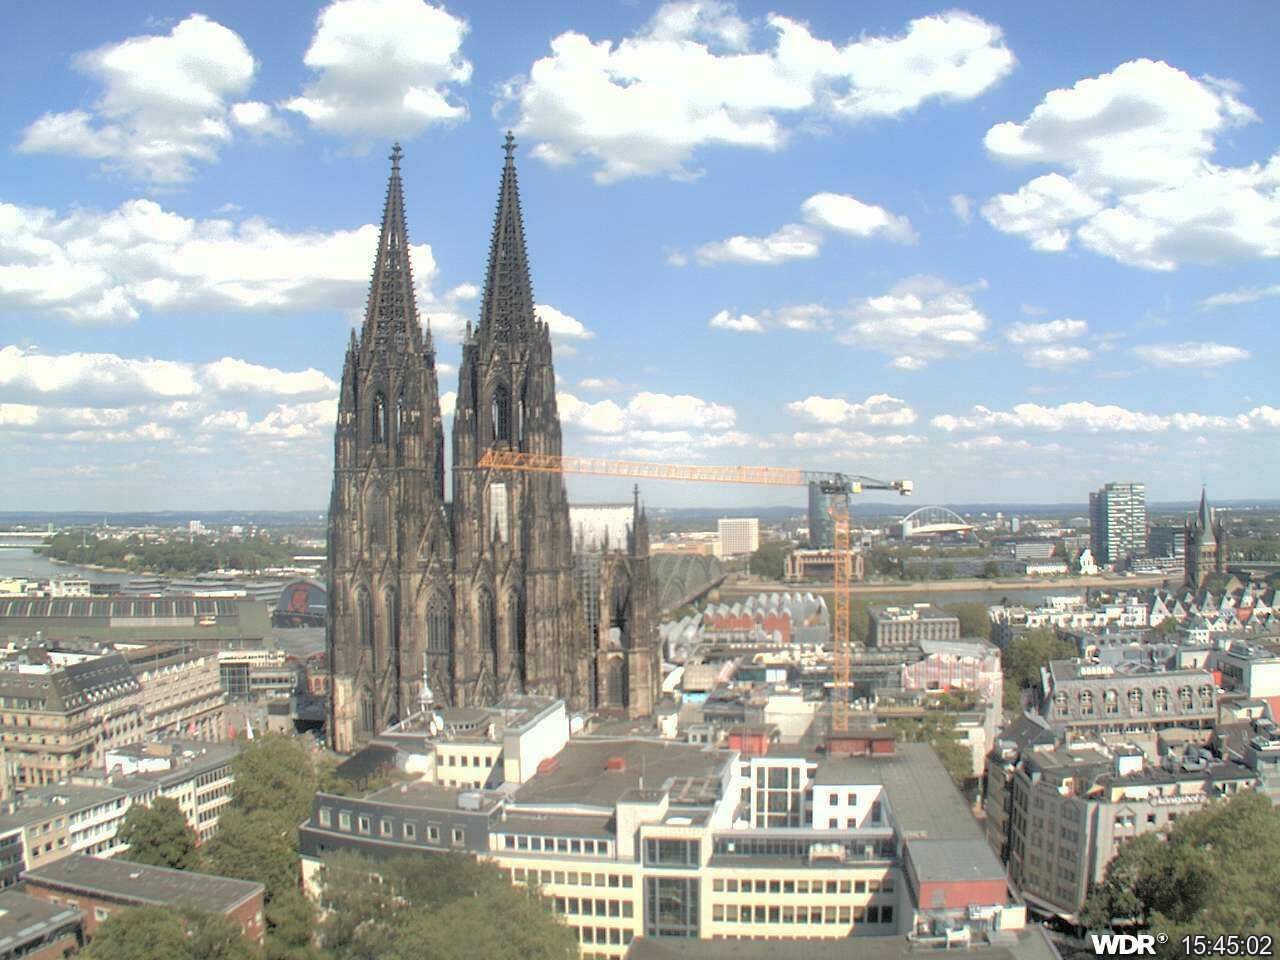 Cologne Wed. 15:45